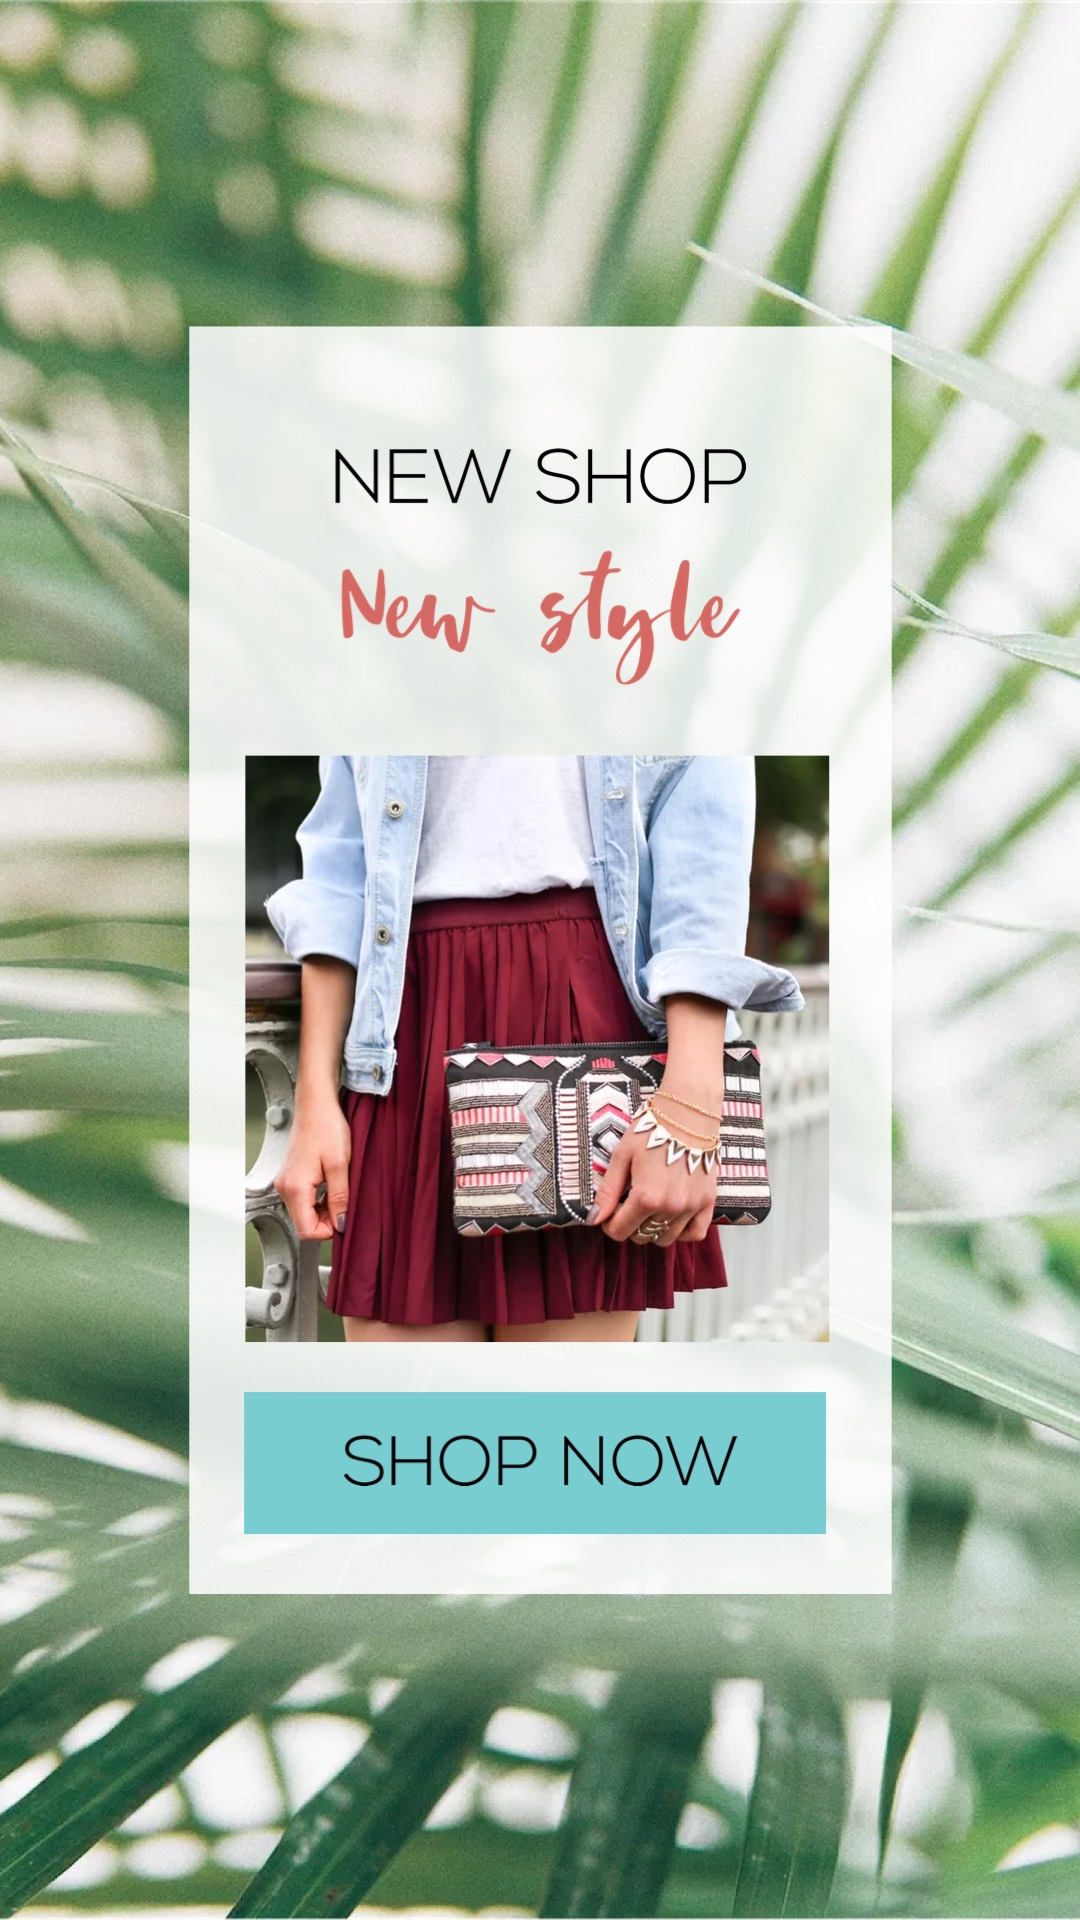 New shop new style sale instagram stroy inspiration template